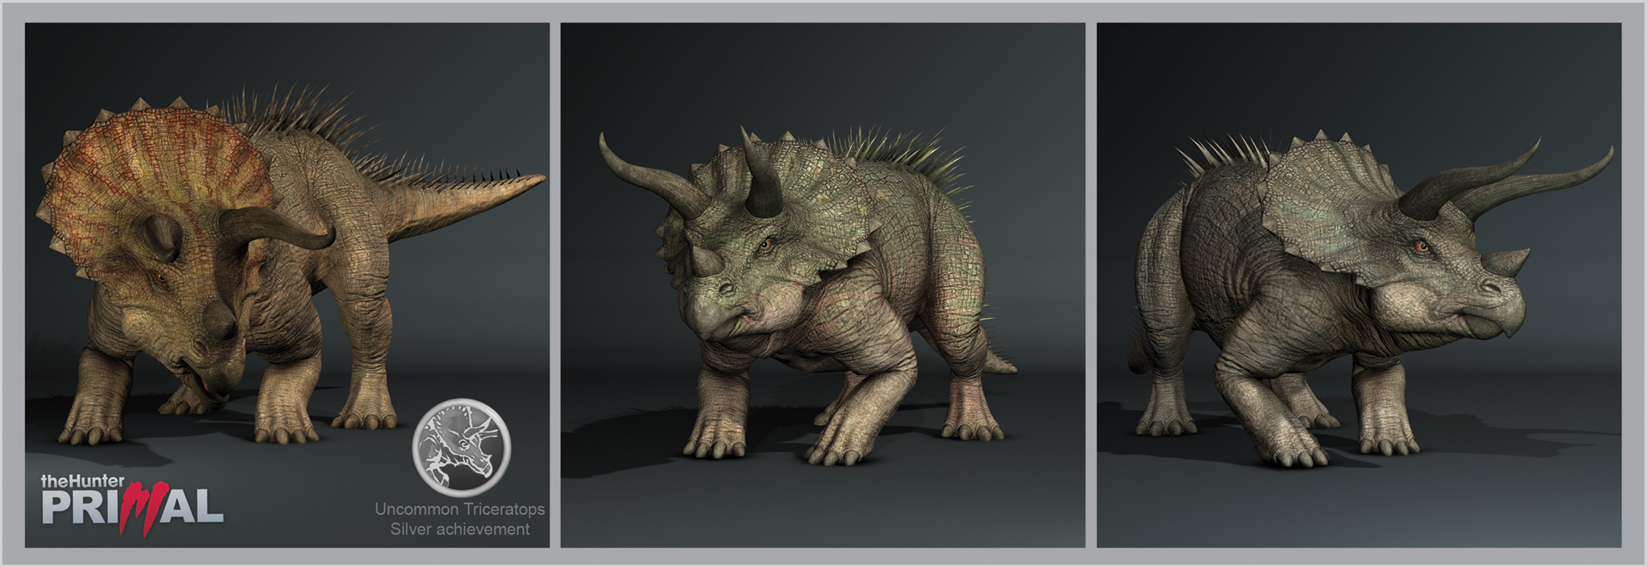 Game update 17/04/15 Triceratops